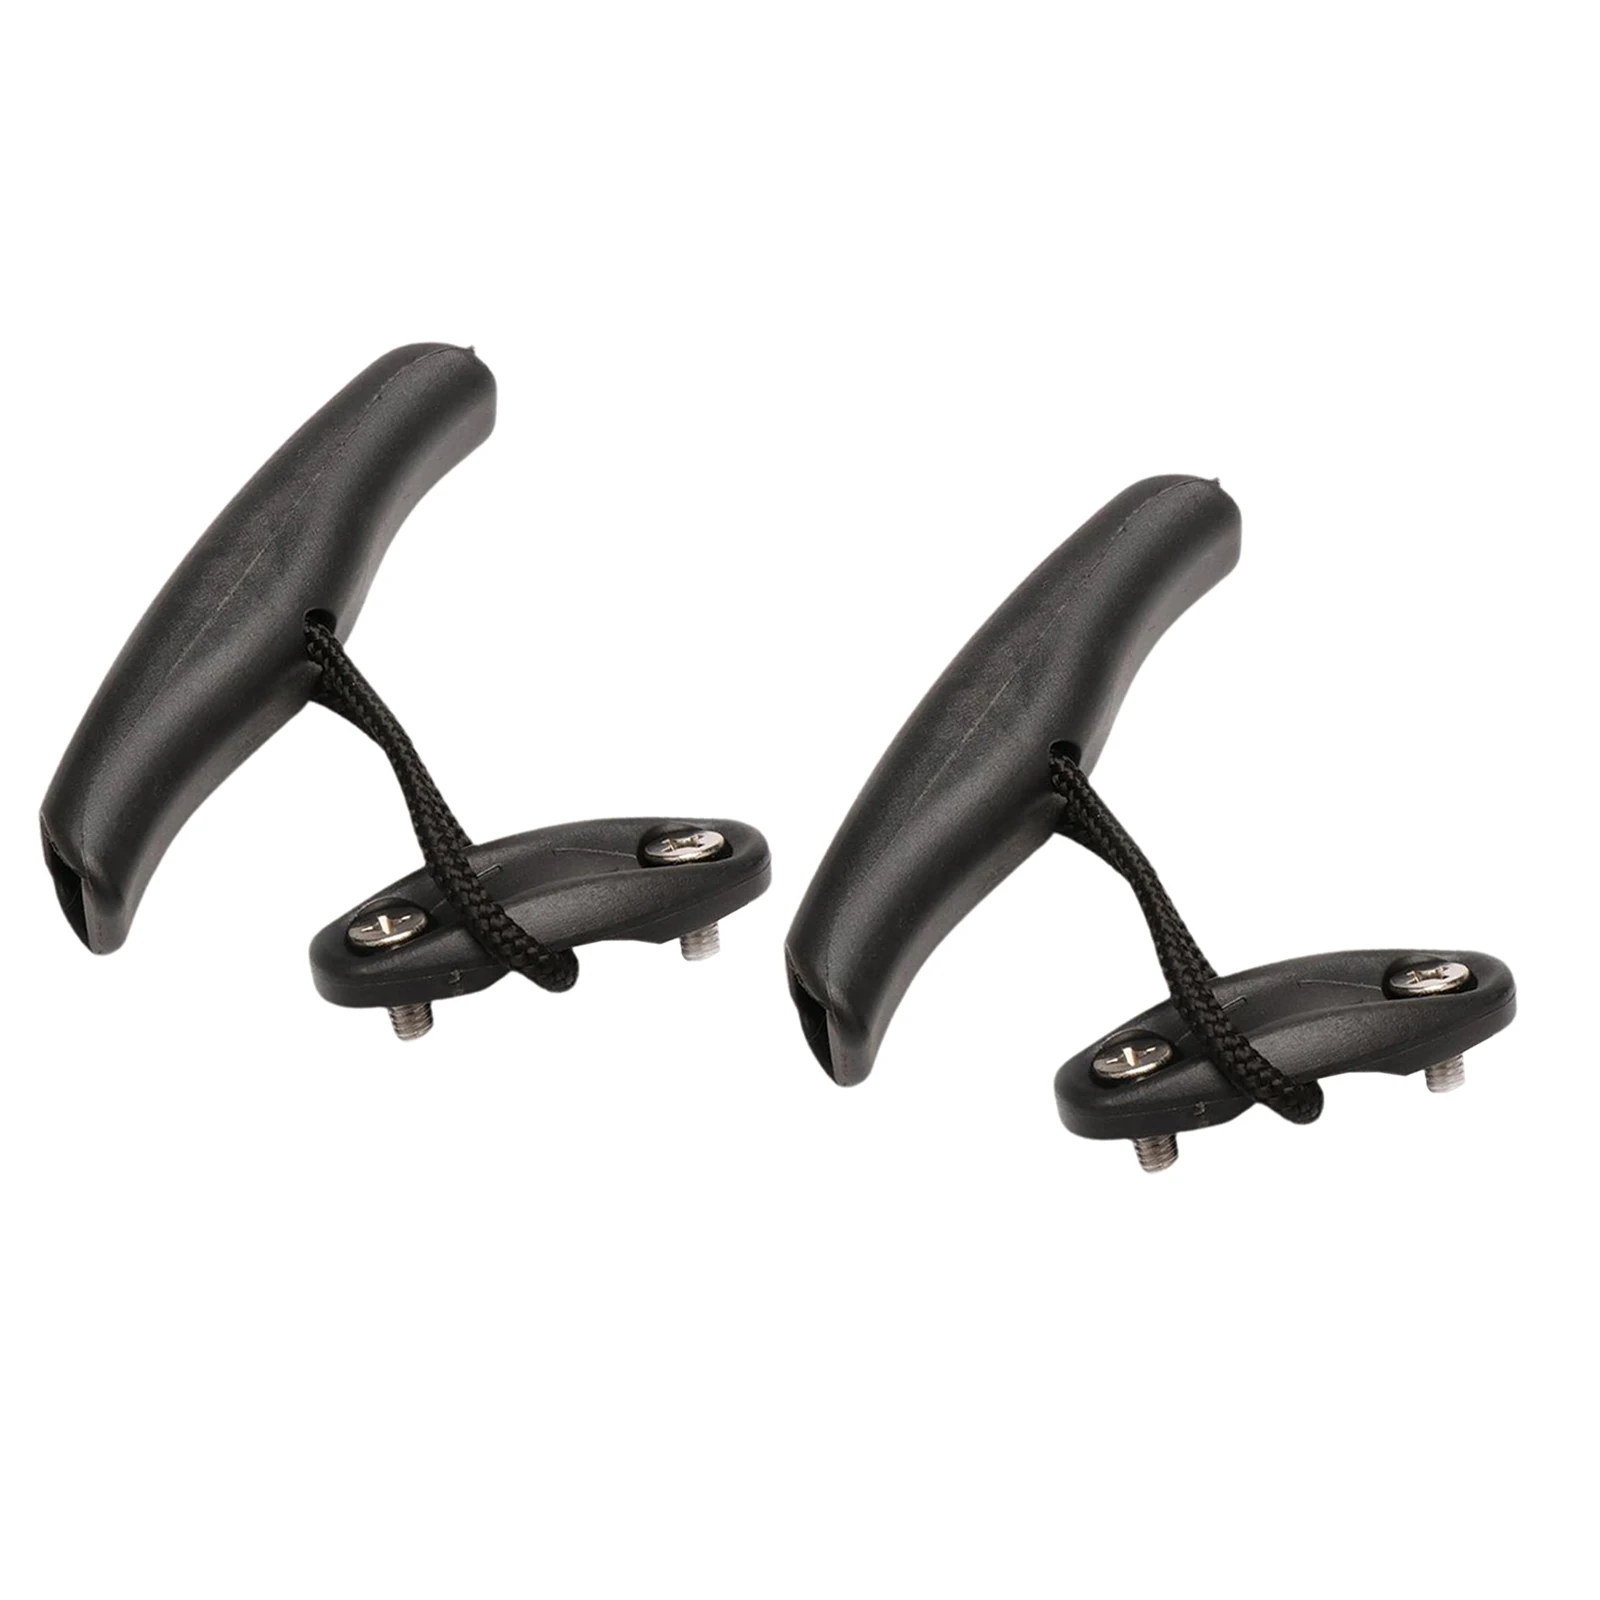 2x Nylon Kayak Pull Handle Canoe Boat Side/Top Mounted Carry T-Handle Toggle